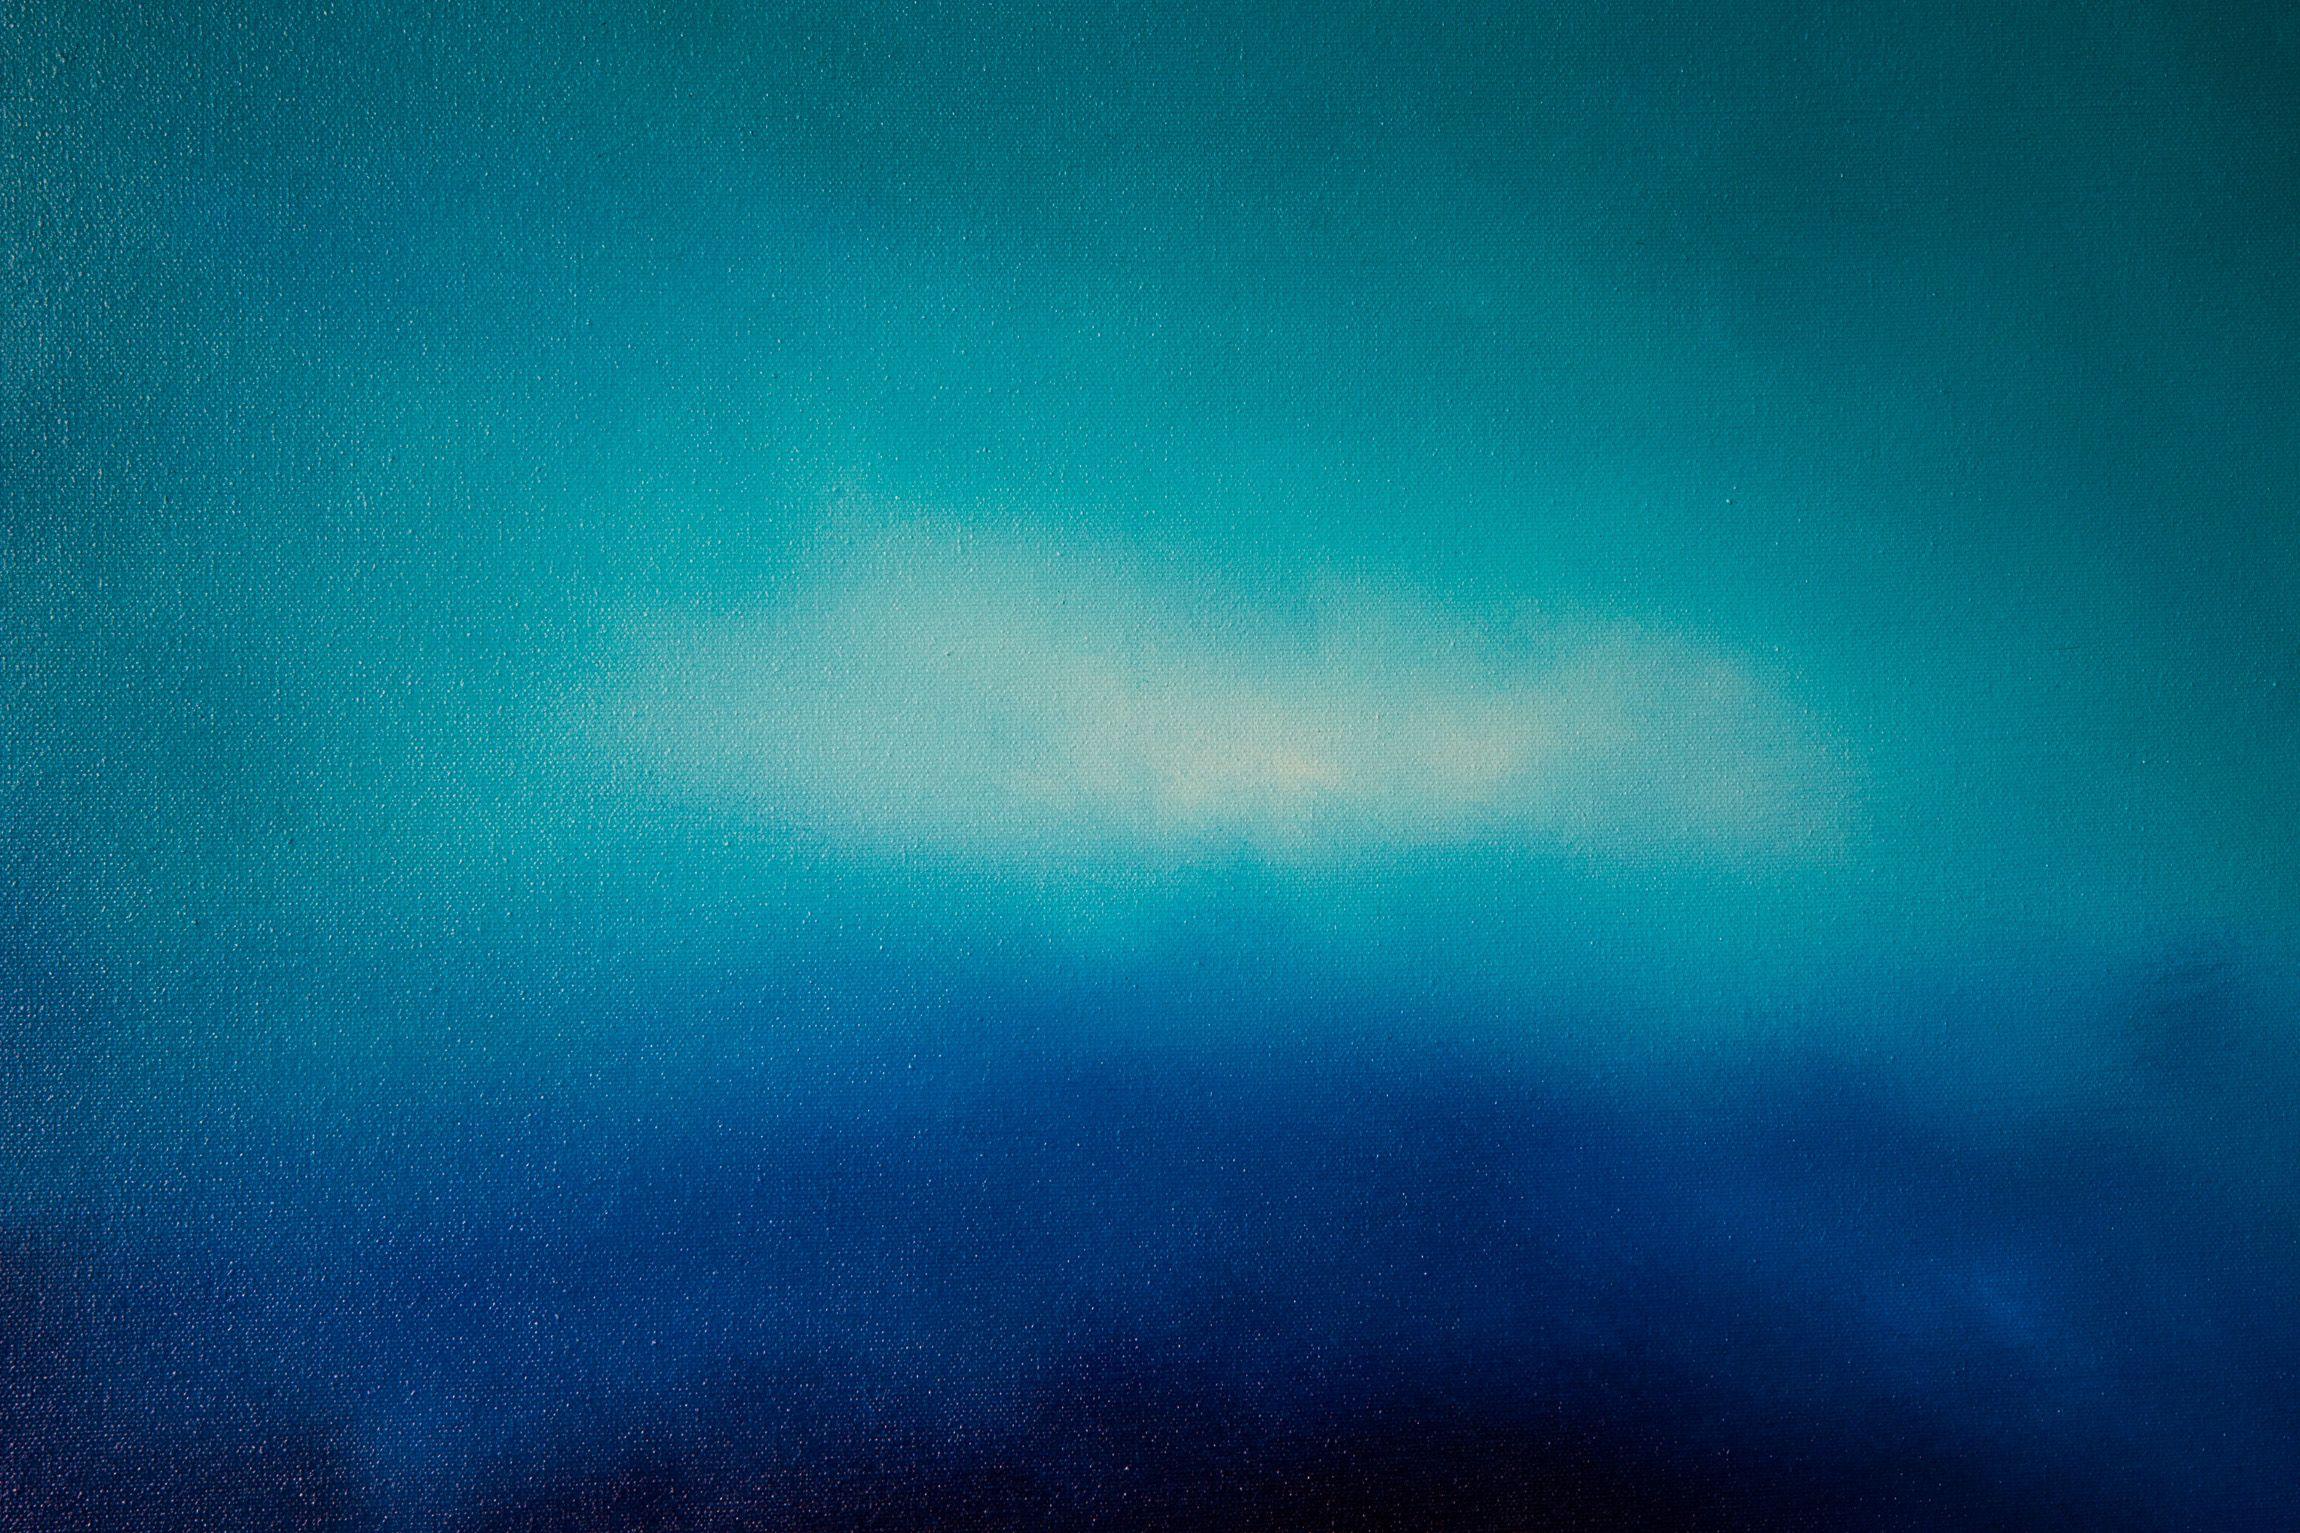 This is a spontaneous artwork created mainly within the blue & turquoise color range with numerous semi translucent layers on top of each other. Inspireed by my own emotional state and contrasting dark and light tones to create a desired 'luminous'